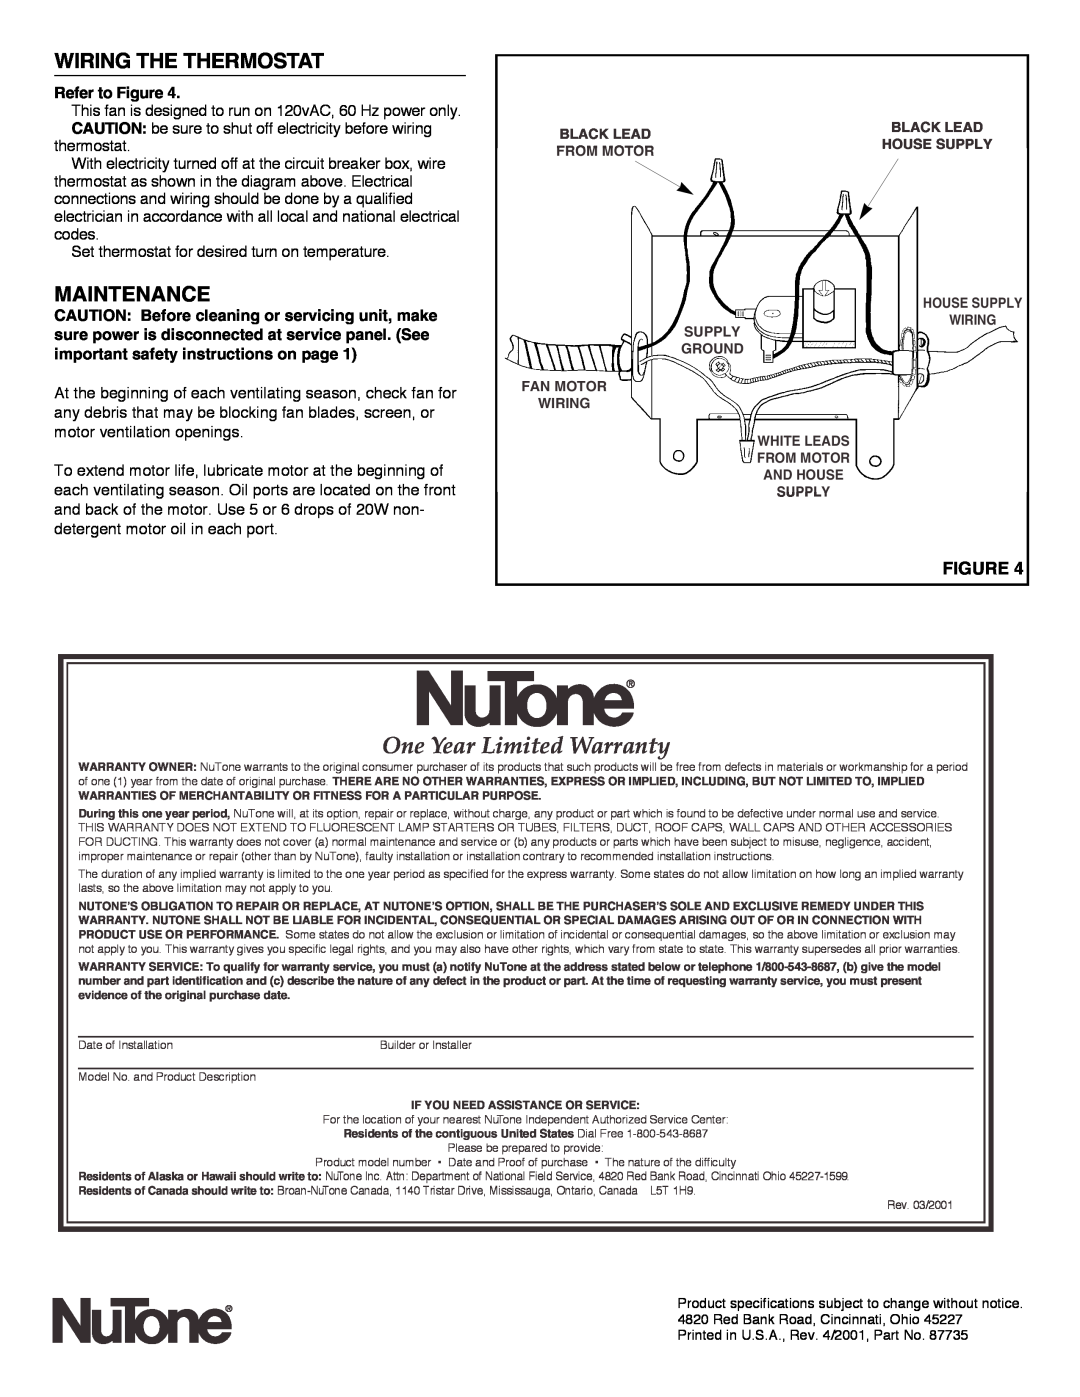 NuTone GF900N, GF1200N Wiring The Thermostat, Maintenance, One Year Limited Warranty, Refer to Figure 